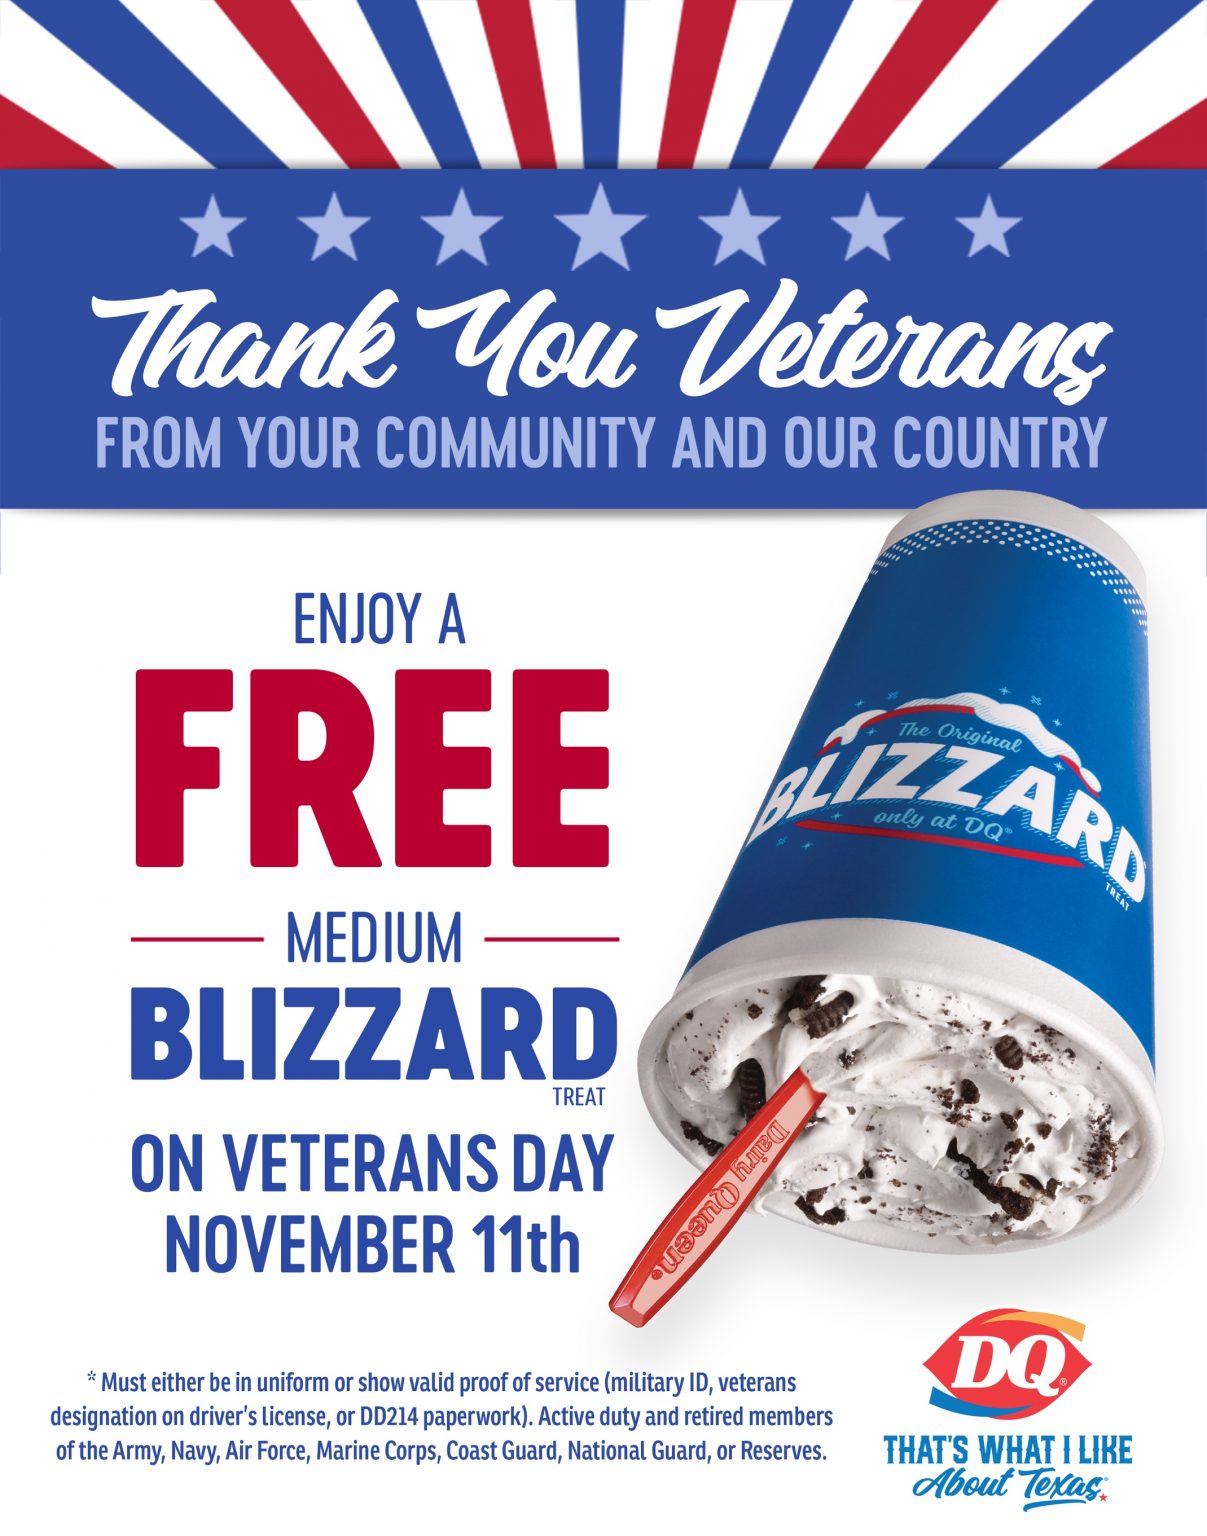 Dairy Queen to honor veterans with free Blizzard treat on Nov. 11